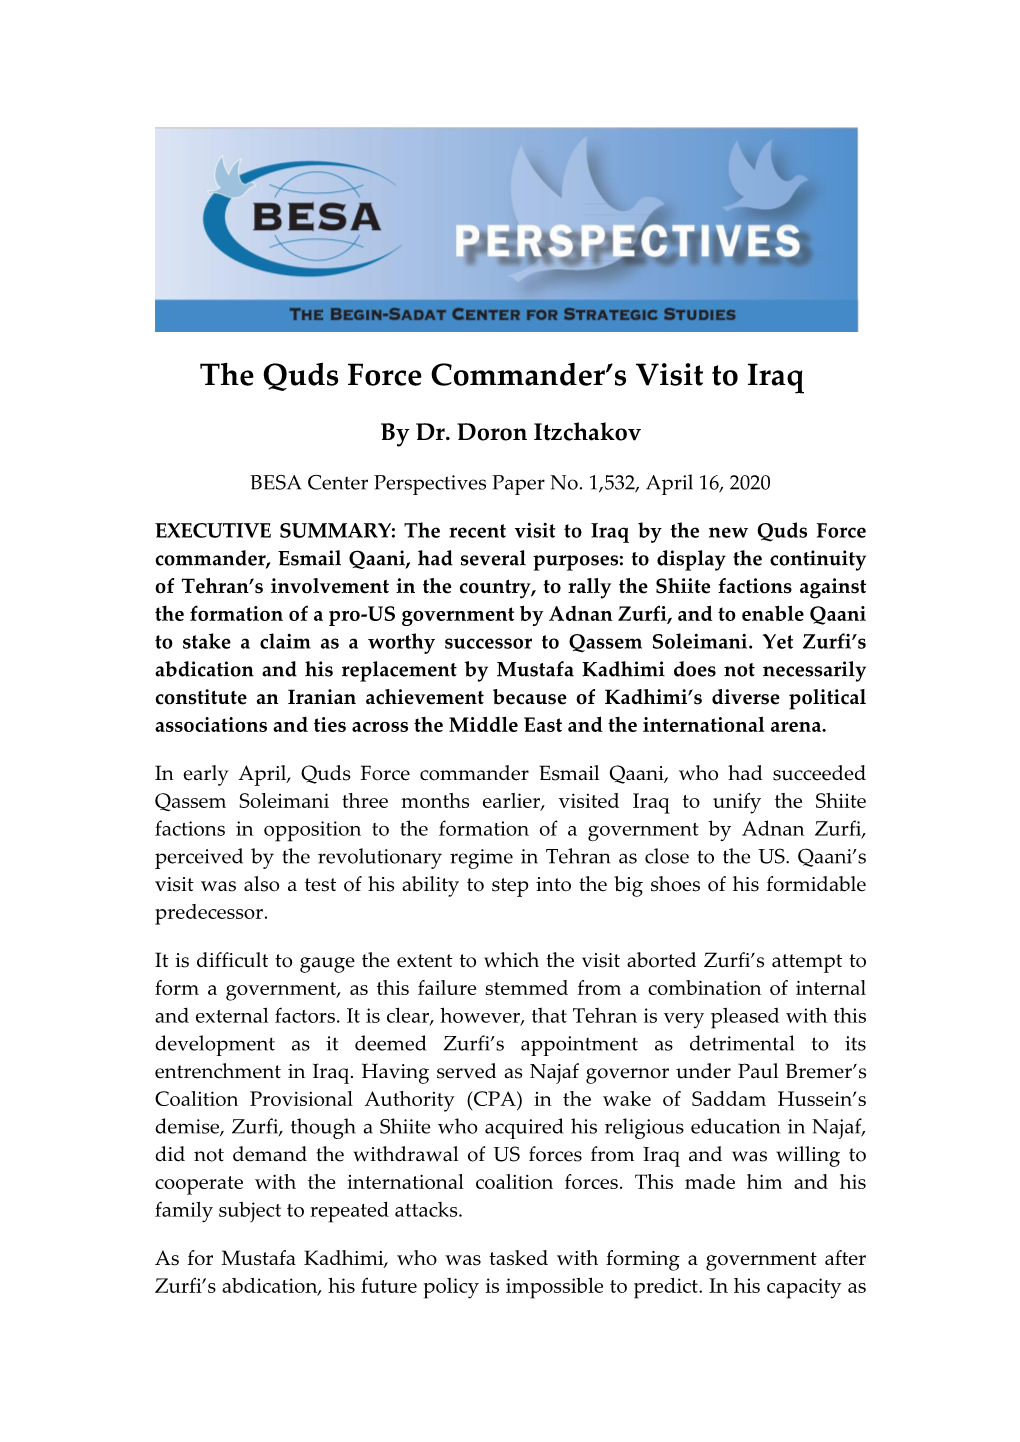 The Quds Force Commander's Visit to Iraq